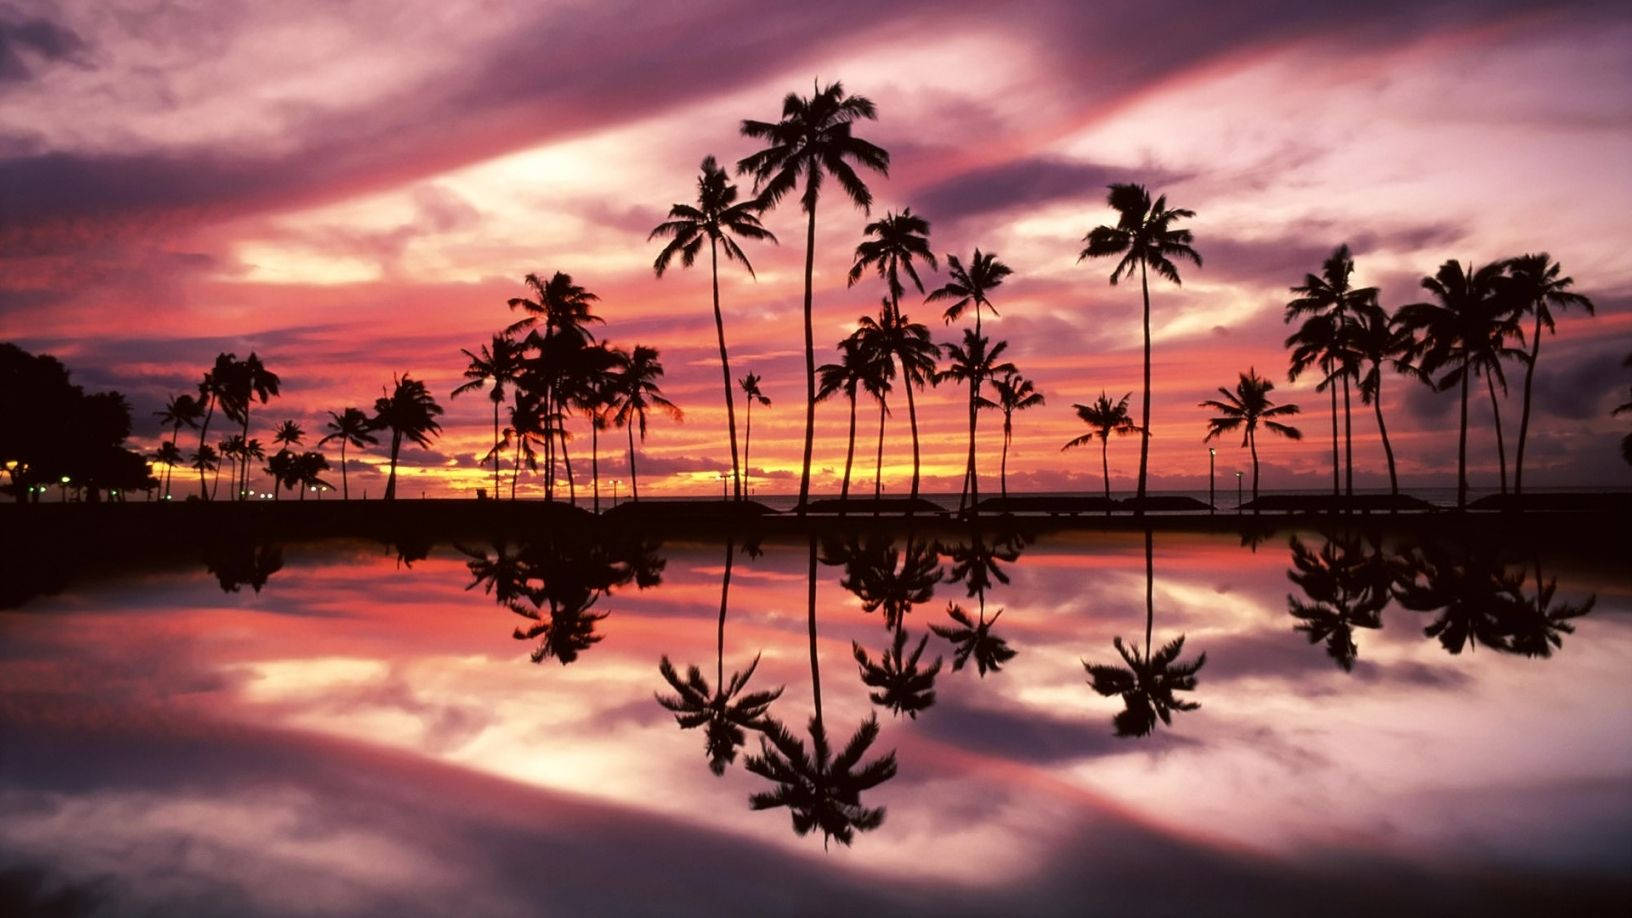 Enjoy The Peaceful Beauty Of A Sunset On The Beach With Your Macbook Wallpaper